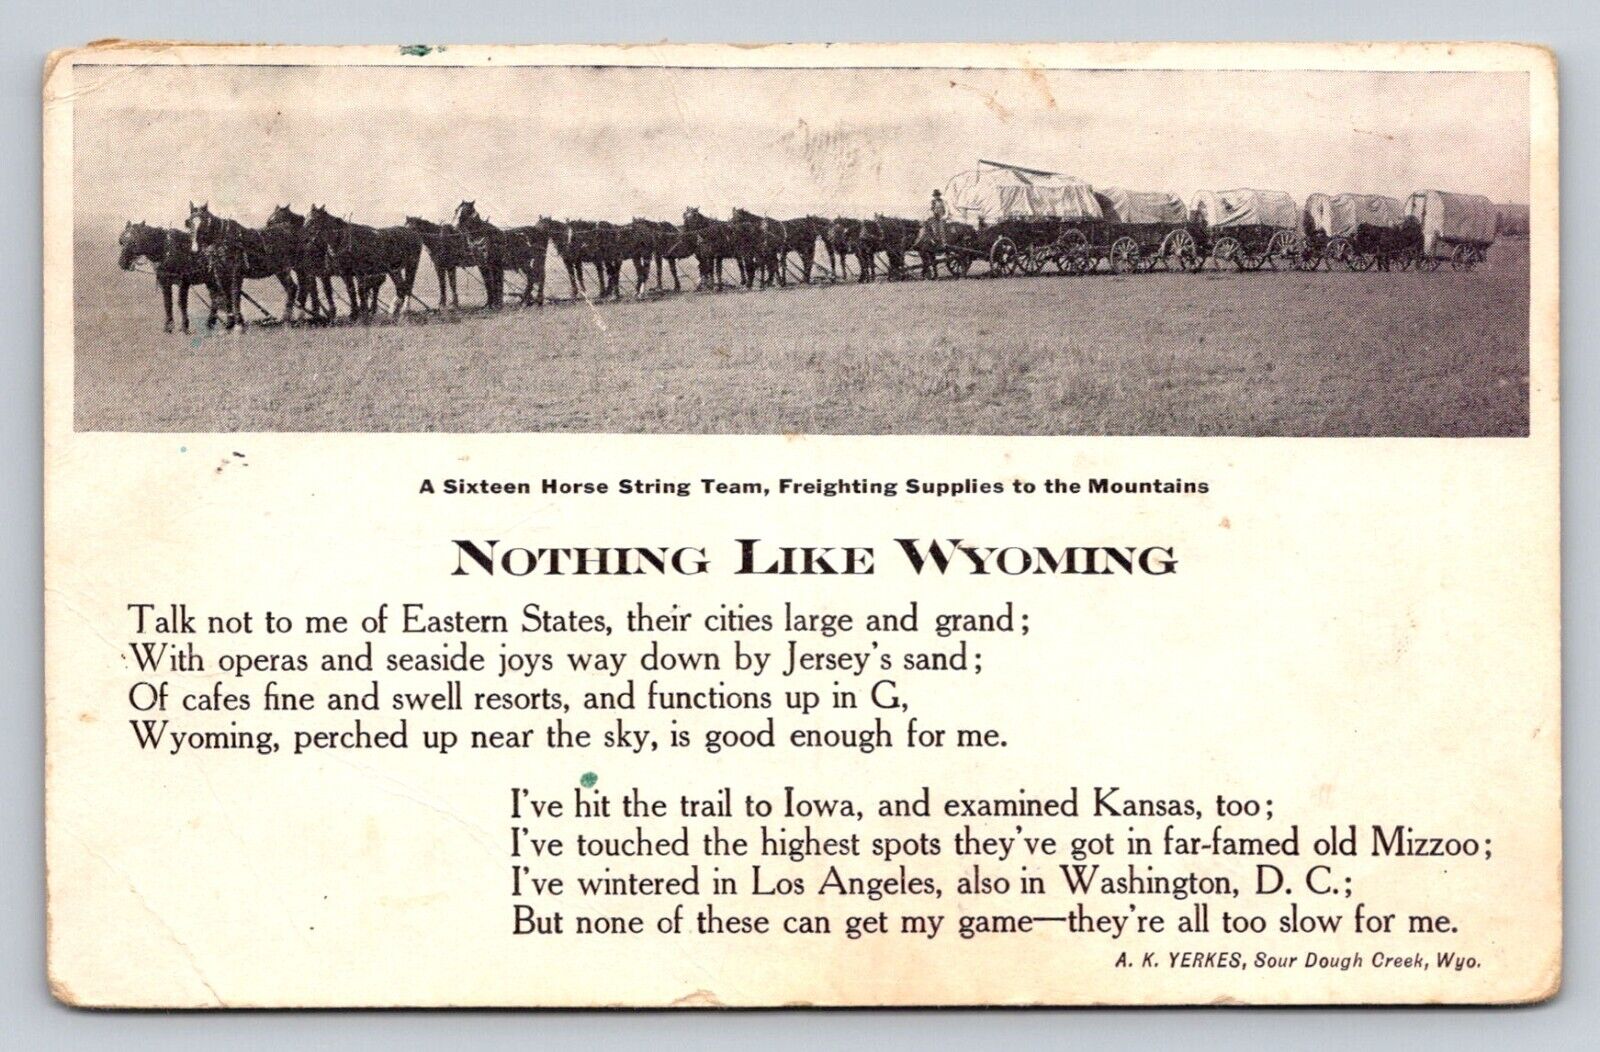 c1910 String Horses Covered Wagons Nothing Like Wyoming P764